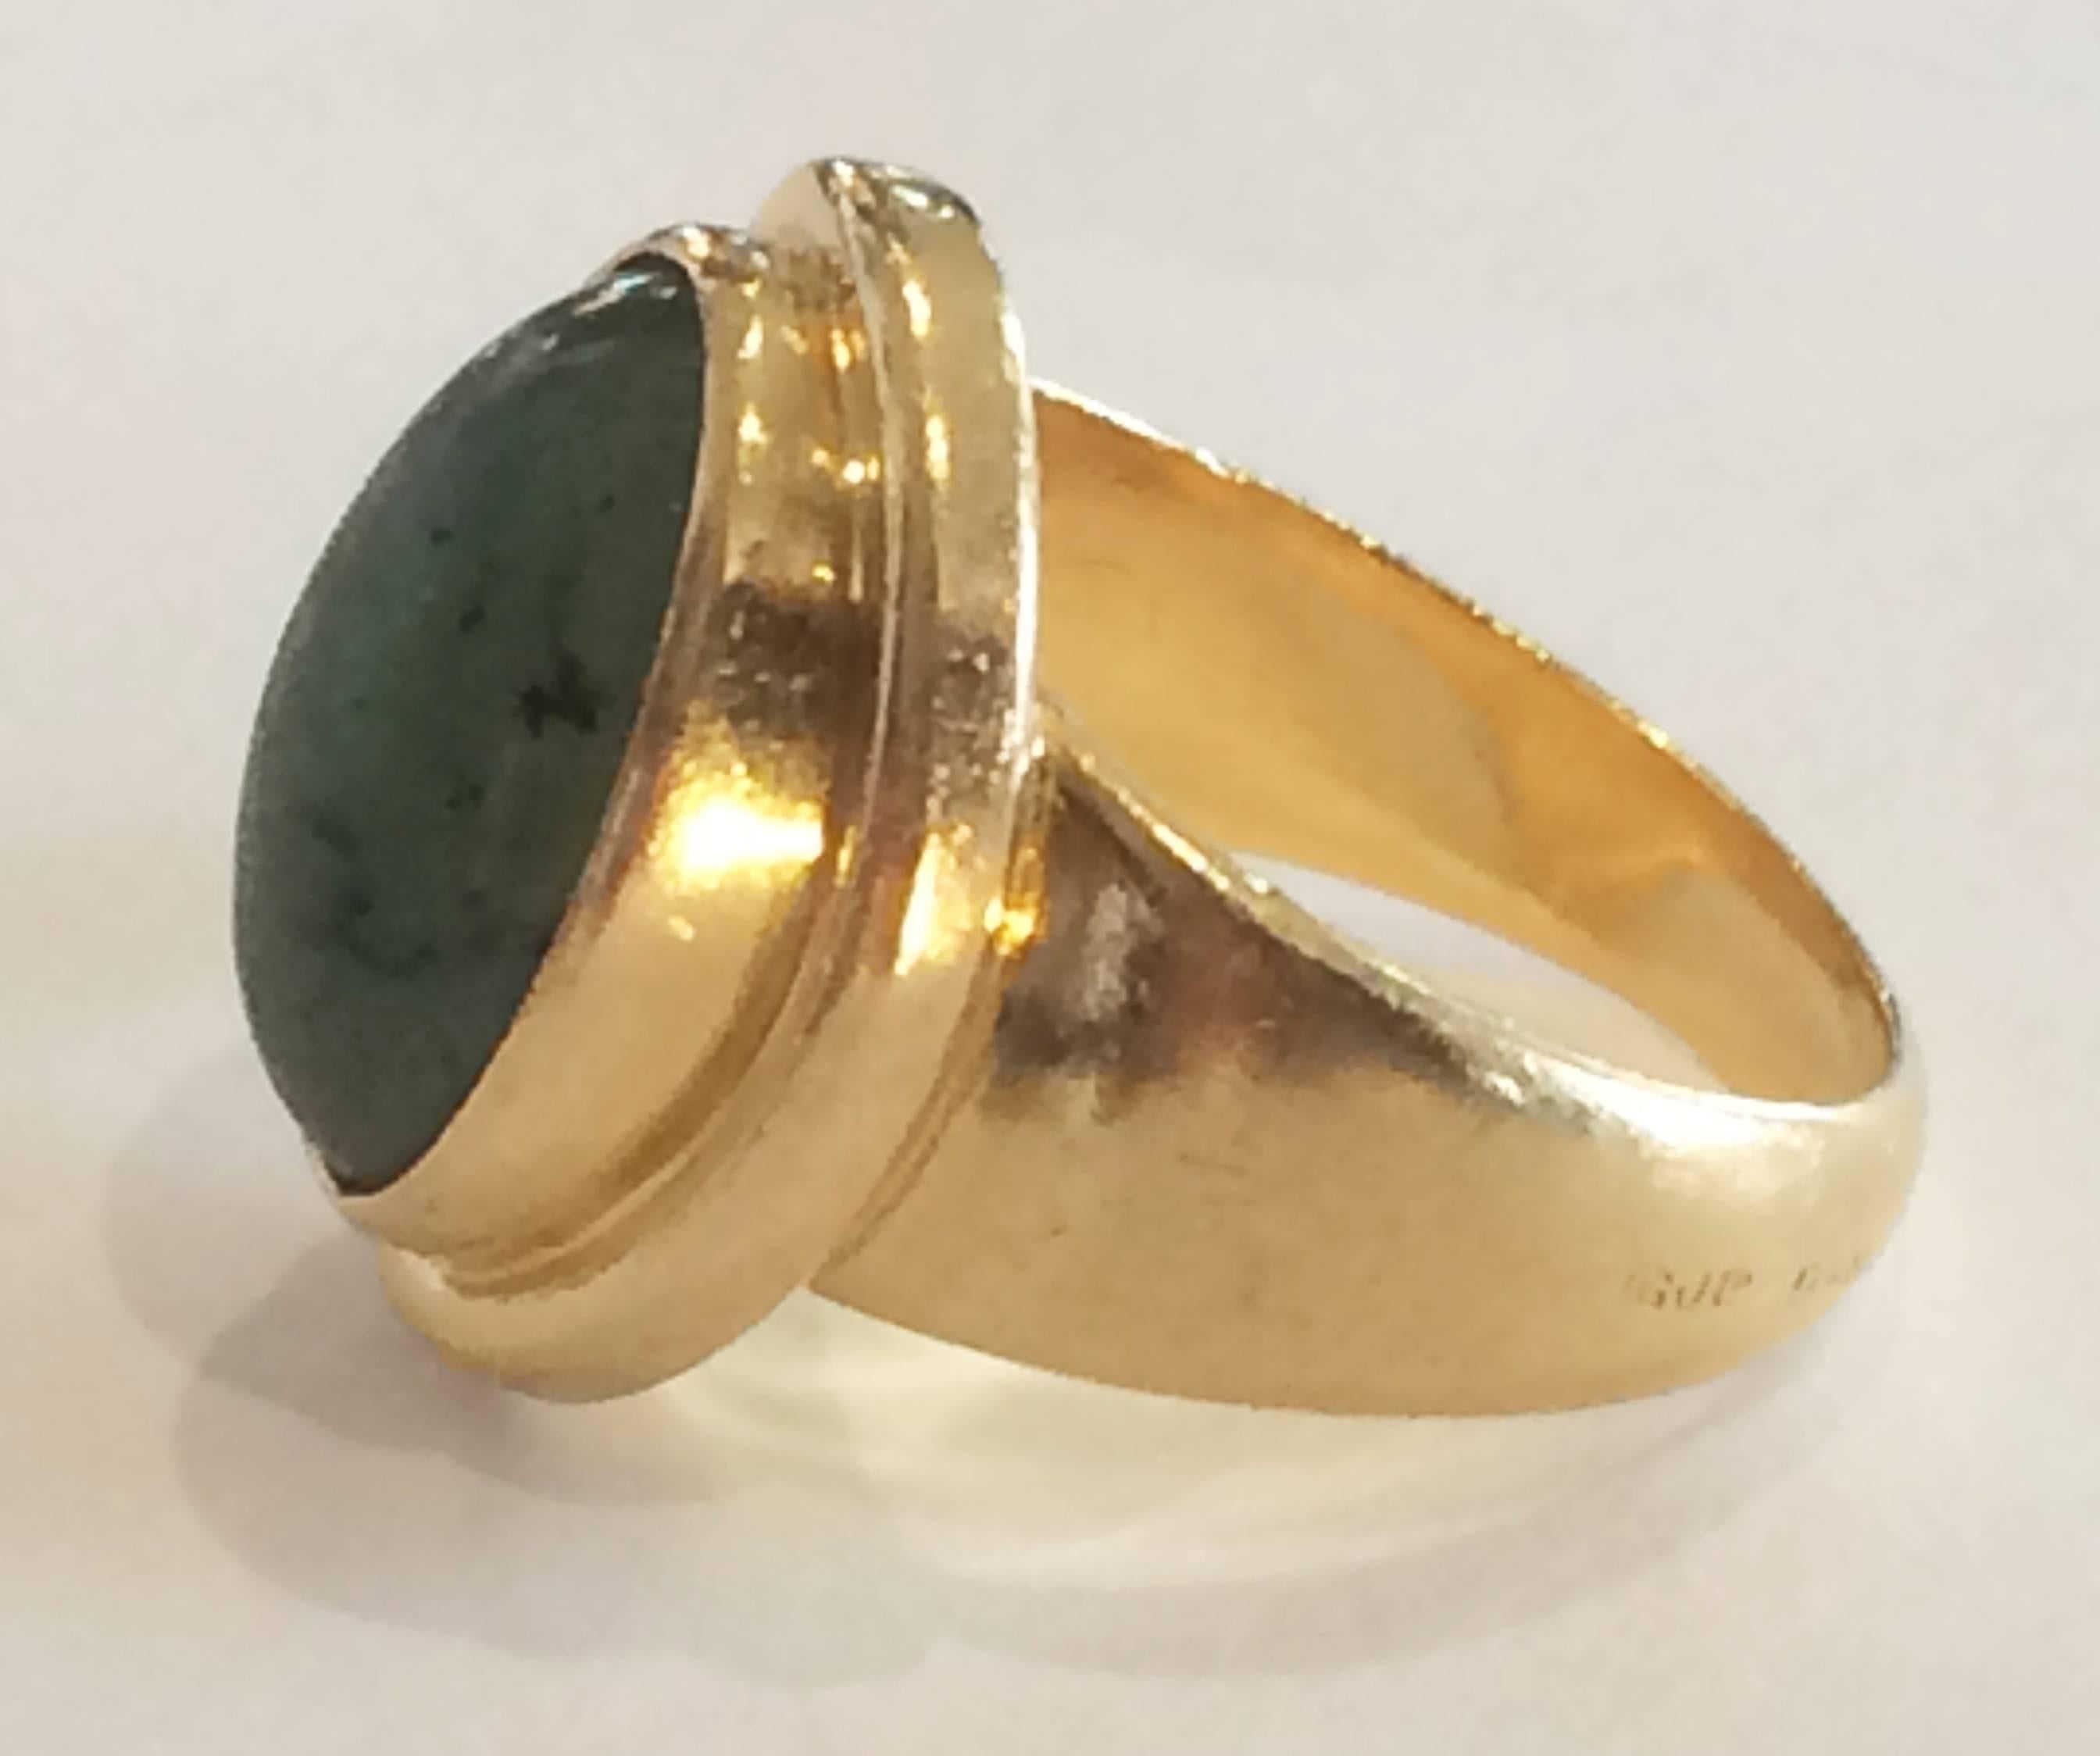 Georg Jensen 18k gold ring with jade cabochon by Harald Nielsen 1046B Design no. 2